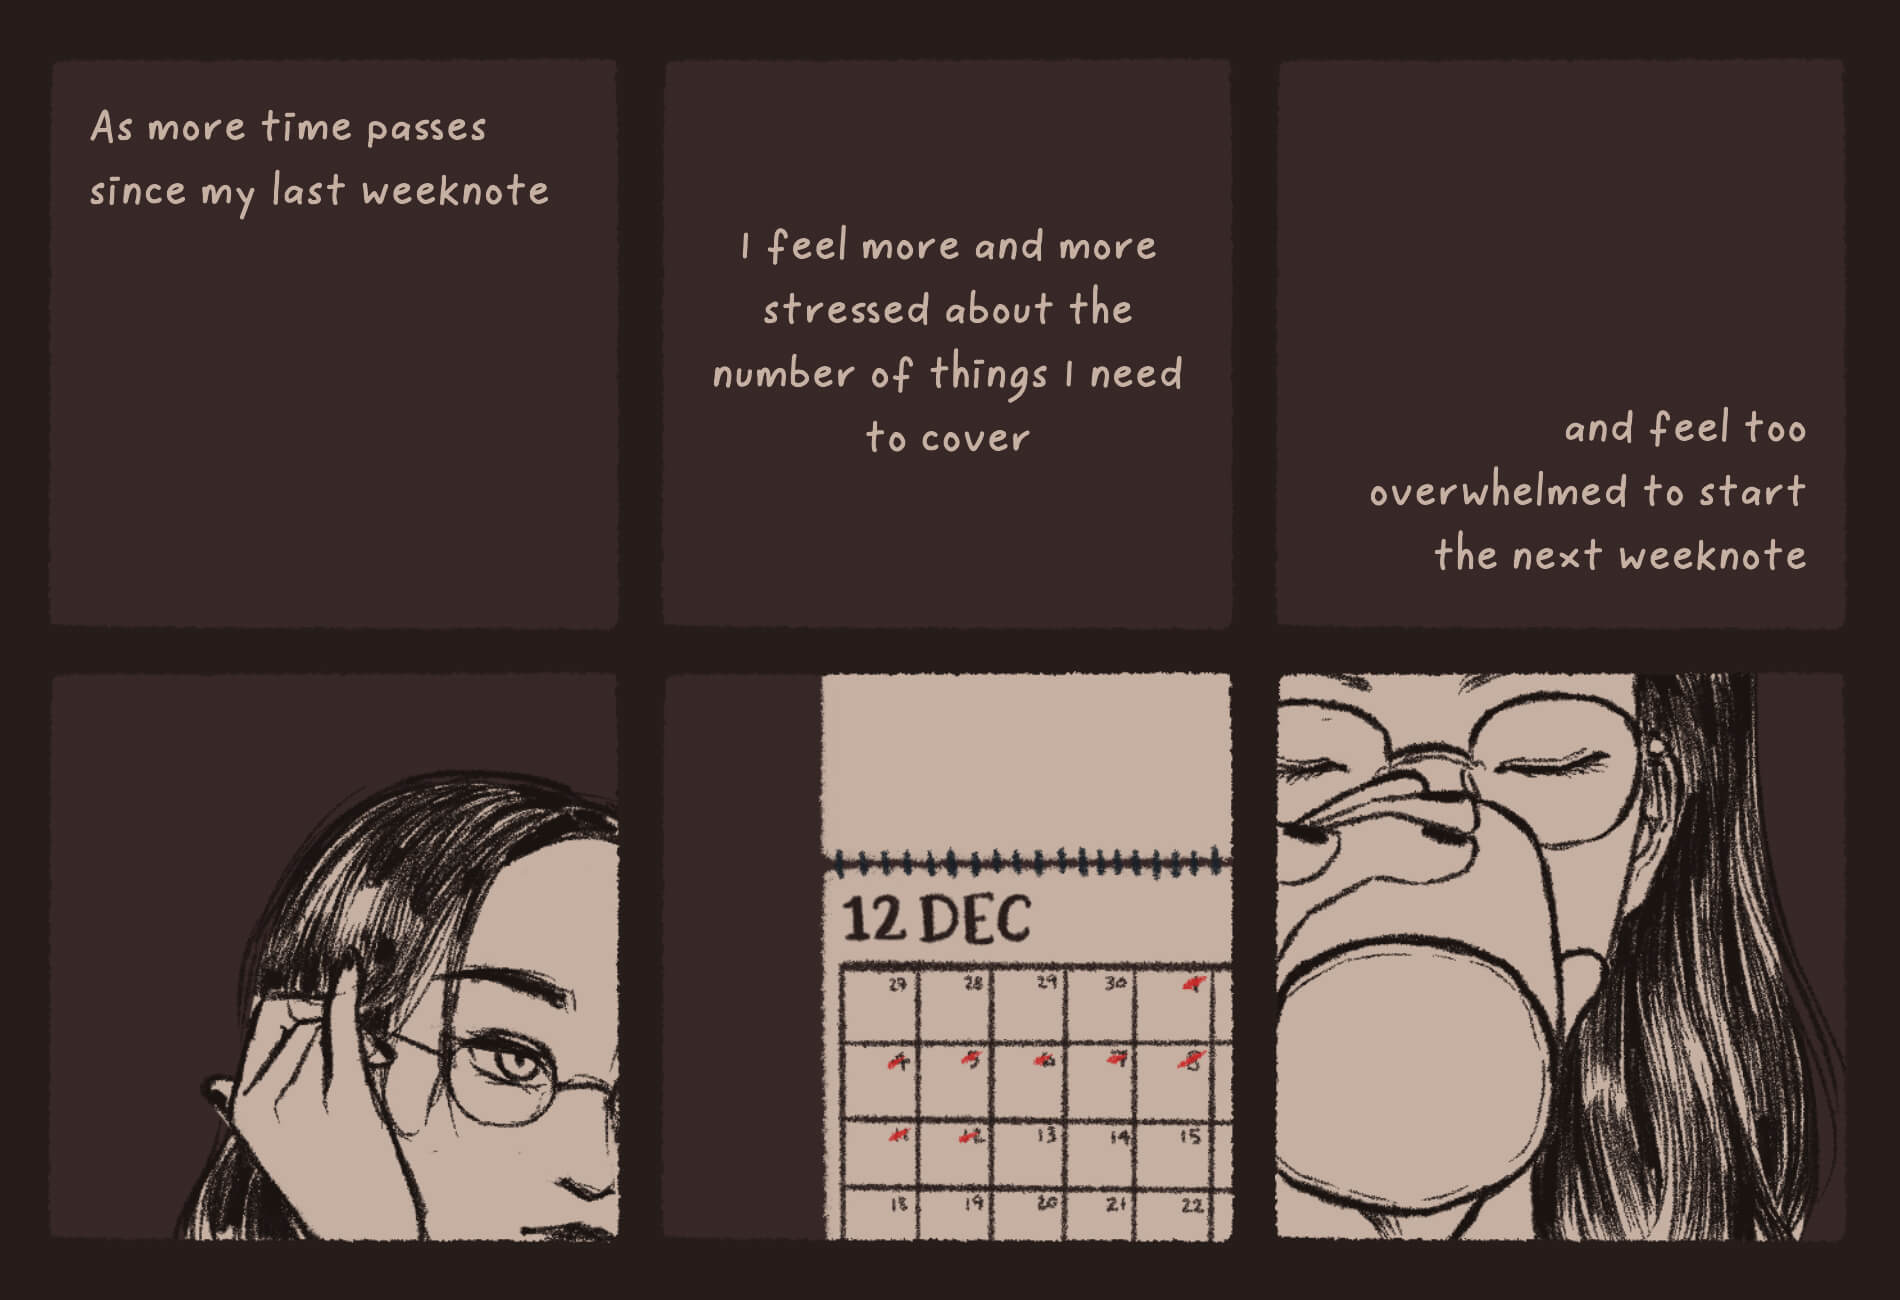 Comic preview: 'As more time passes since my last weeknote / I feel more and more stressed about the number of things I need to cover / and feel too overwhelmed to start the next weeknote.' A vignette of myself passing time.